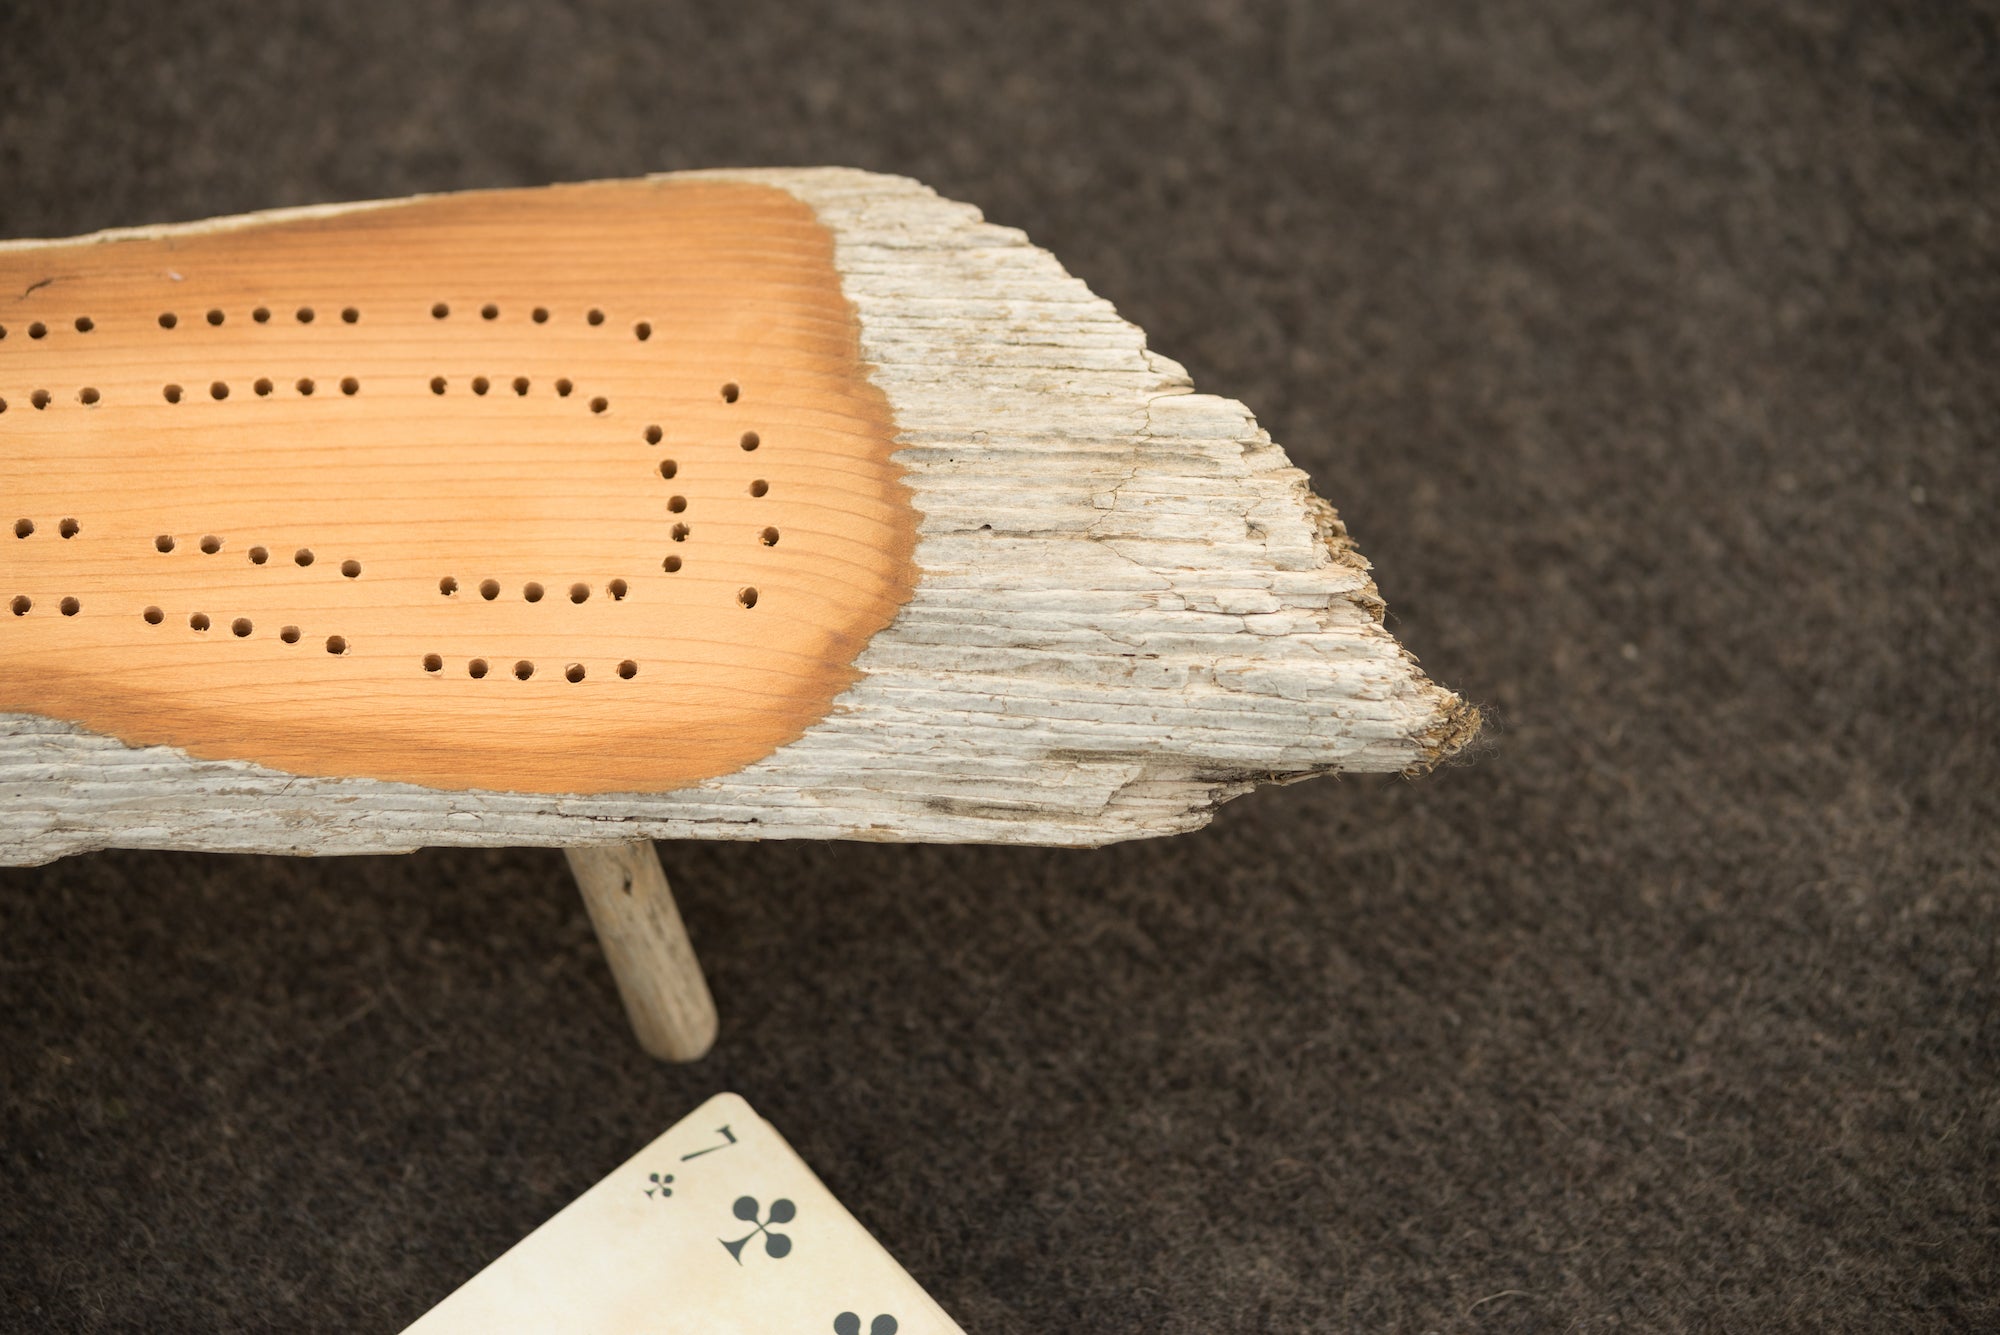 New product! Introducing Natural Branch Wood Cribbage Boards